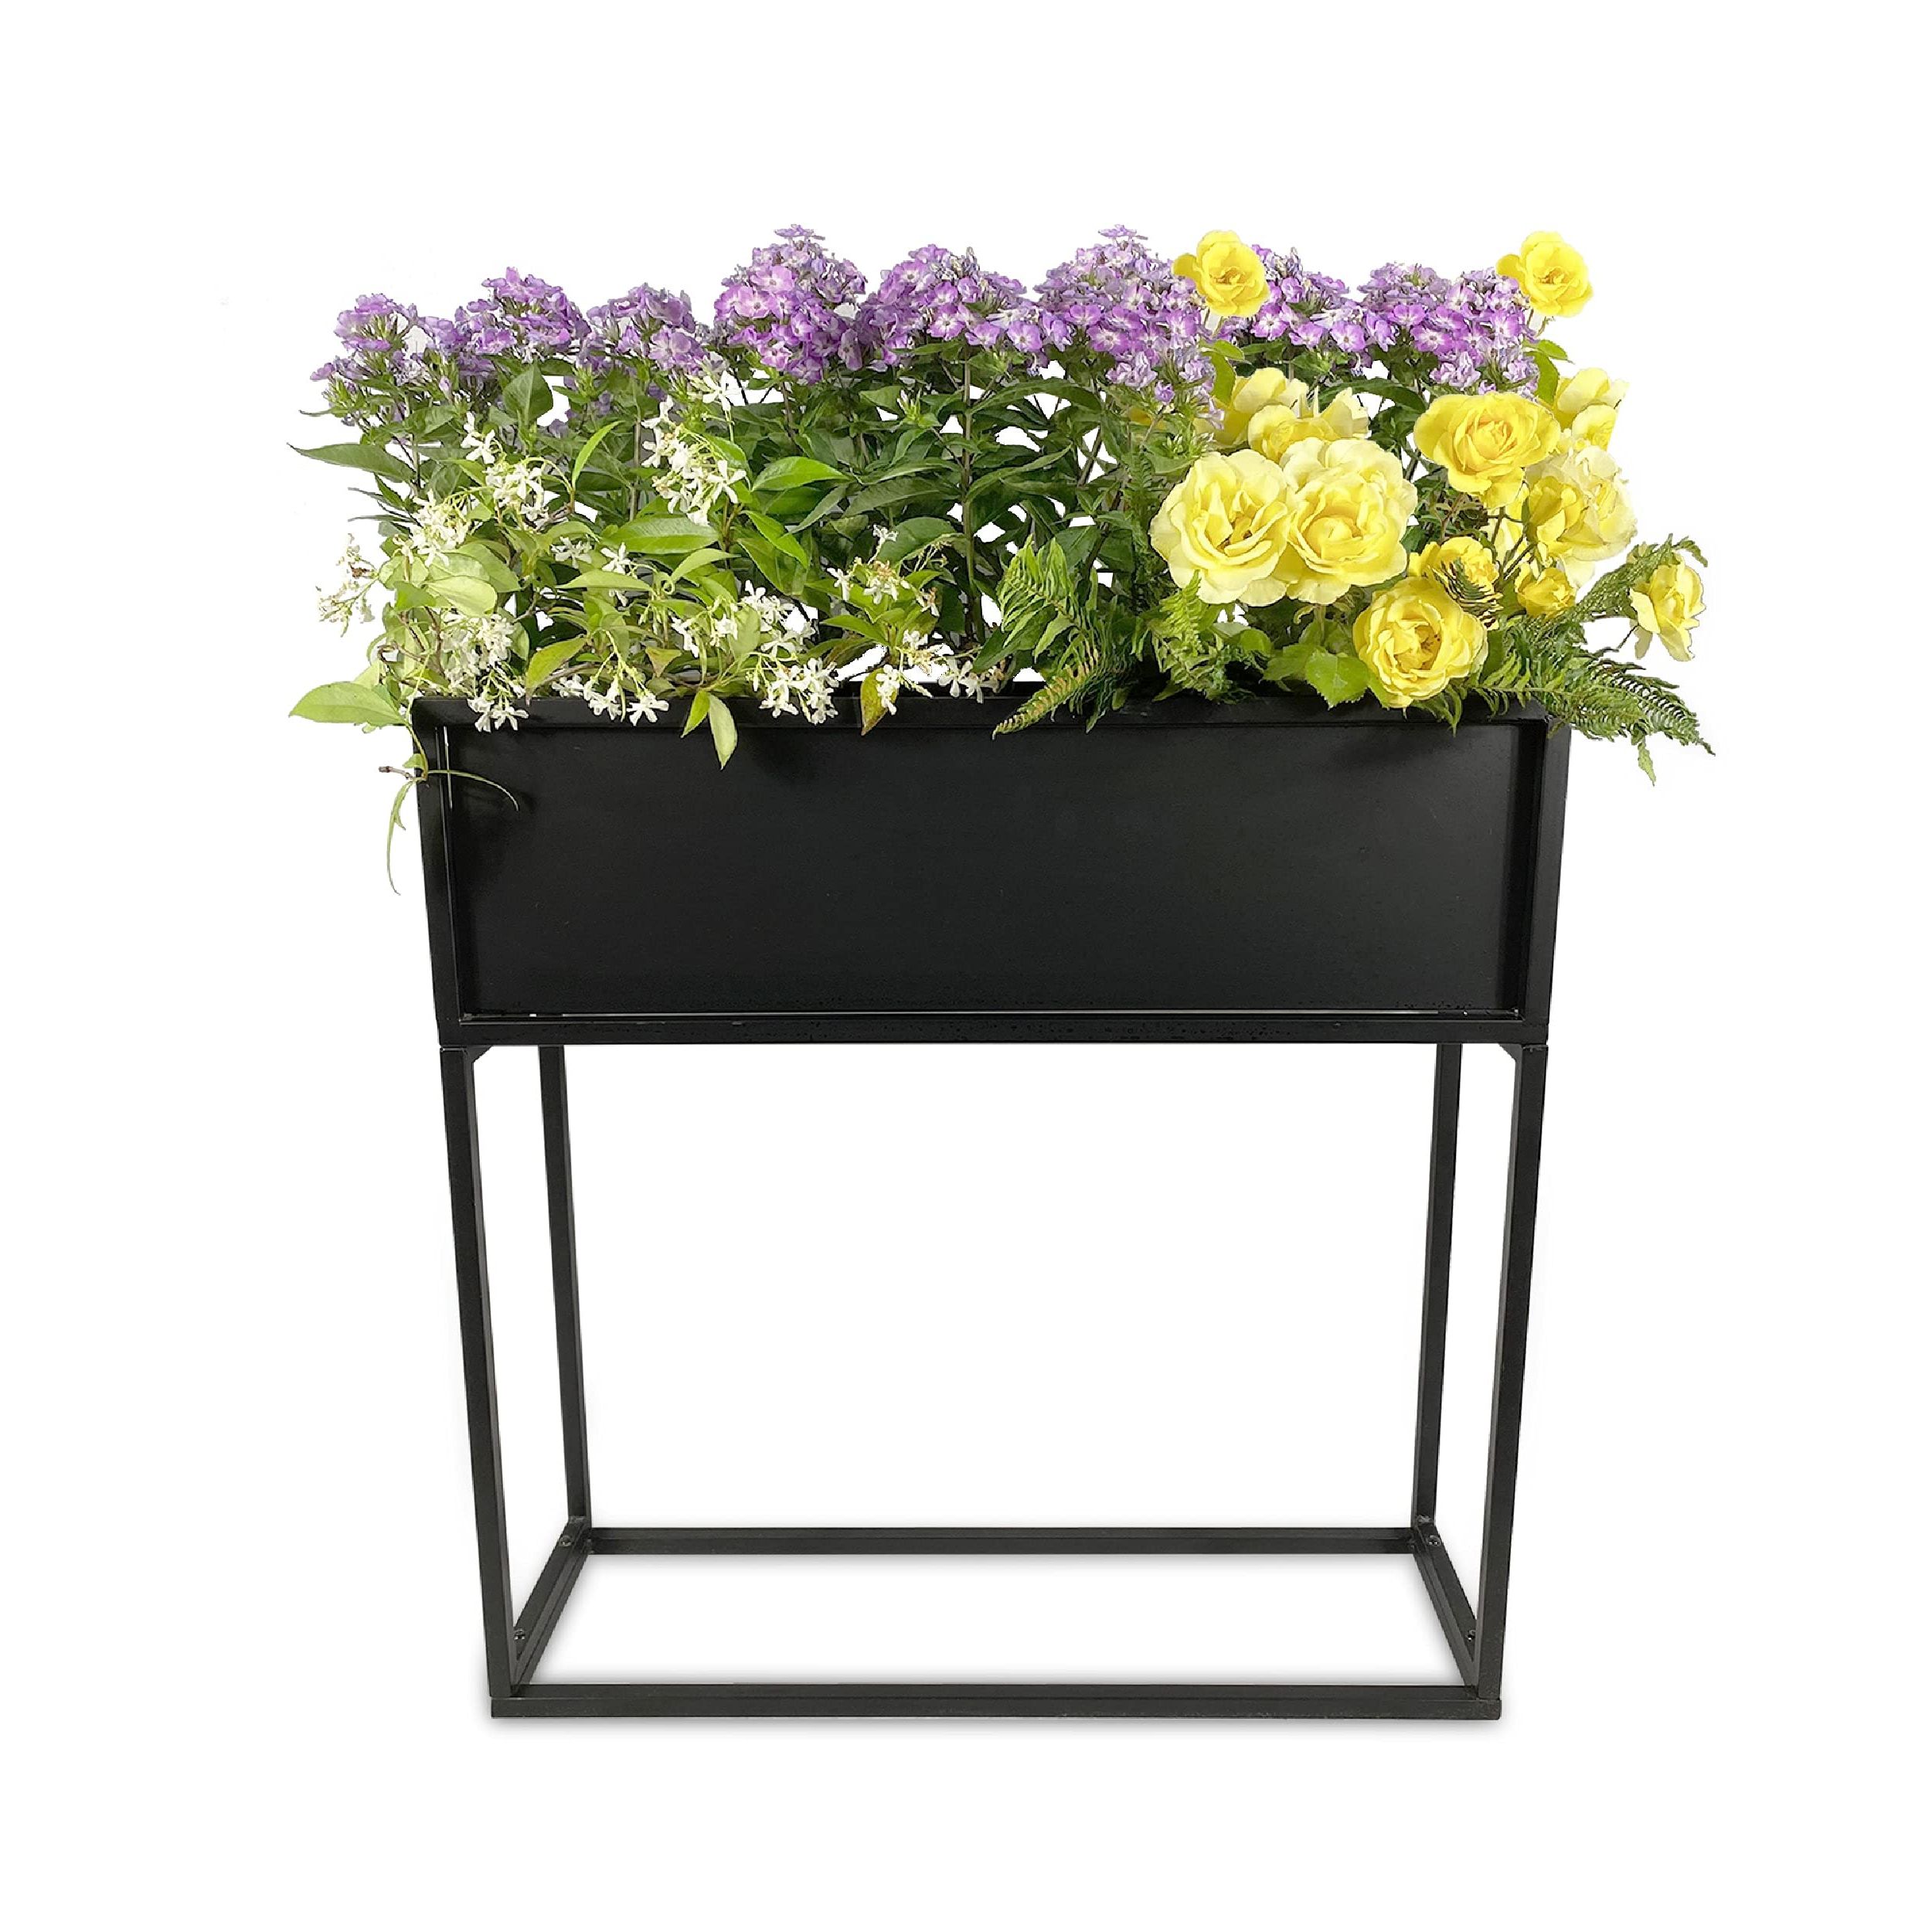 Widely Used Amazon : Cocoyard Modern Elevated Metal Rectangular Planter Box –  Planters For Outdoor Plants – Made Durable And Resilient Metal – Indoor  Outdoor Plant Stand – Ideal For Garden Decor, Backyard And Regarding Plant Stands With Flower Box (View 1 of 10)